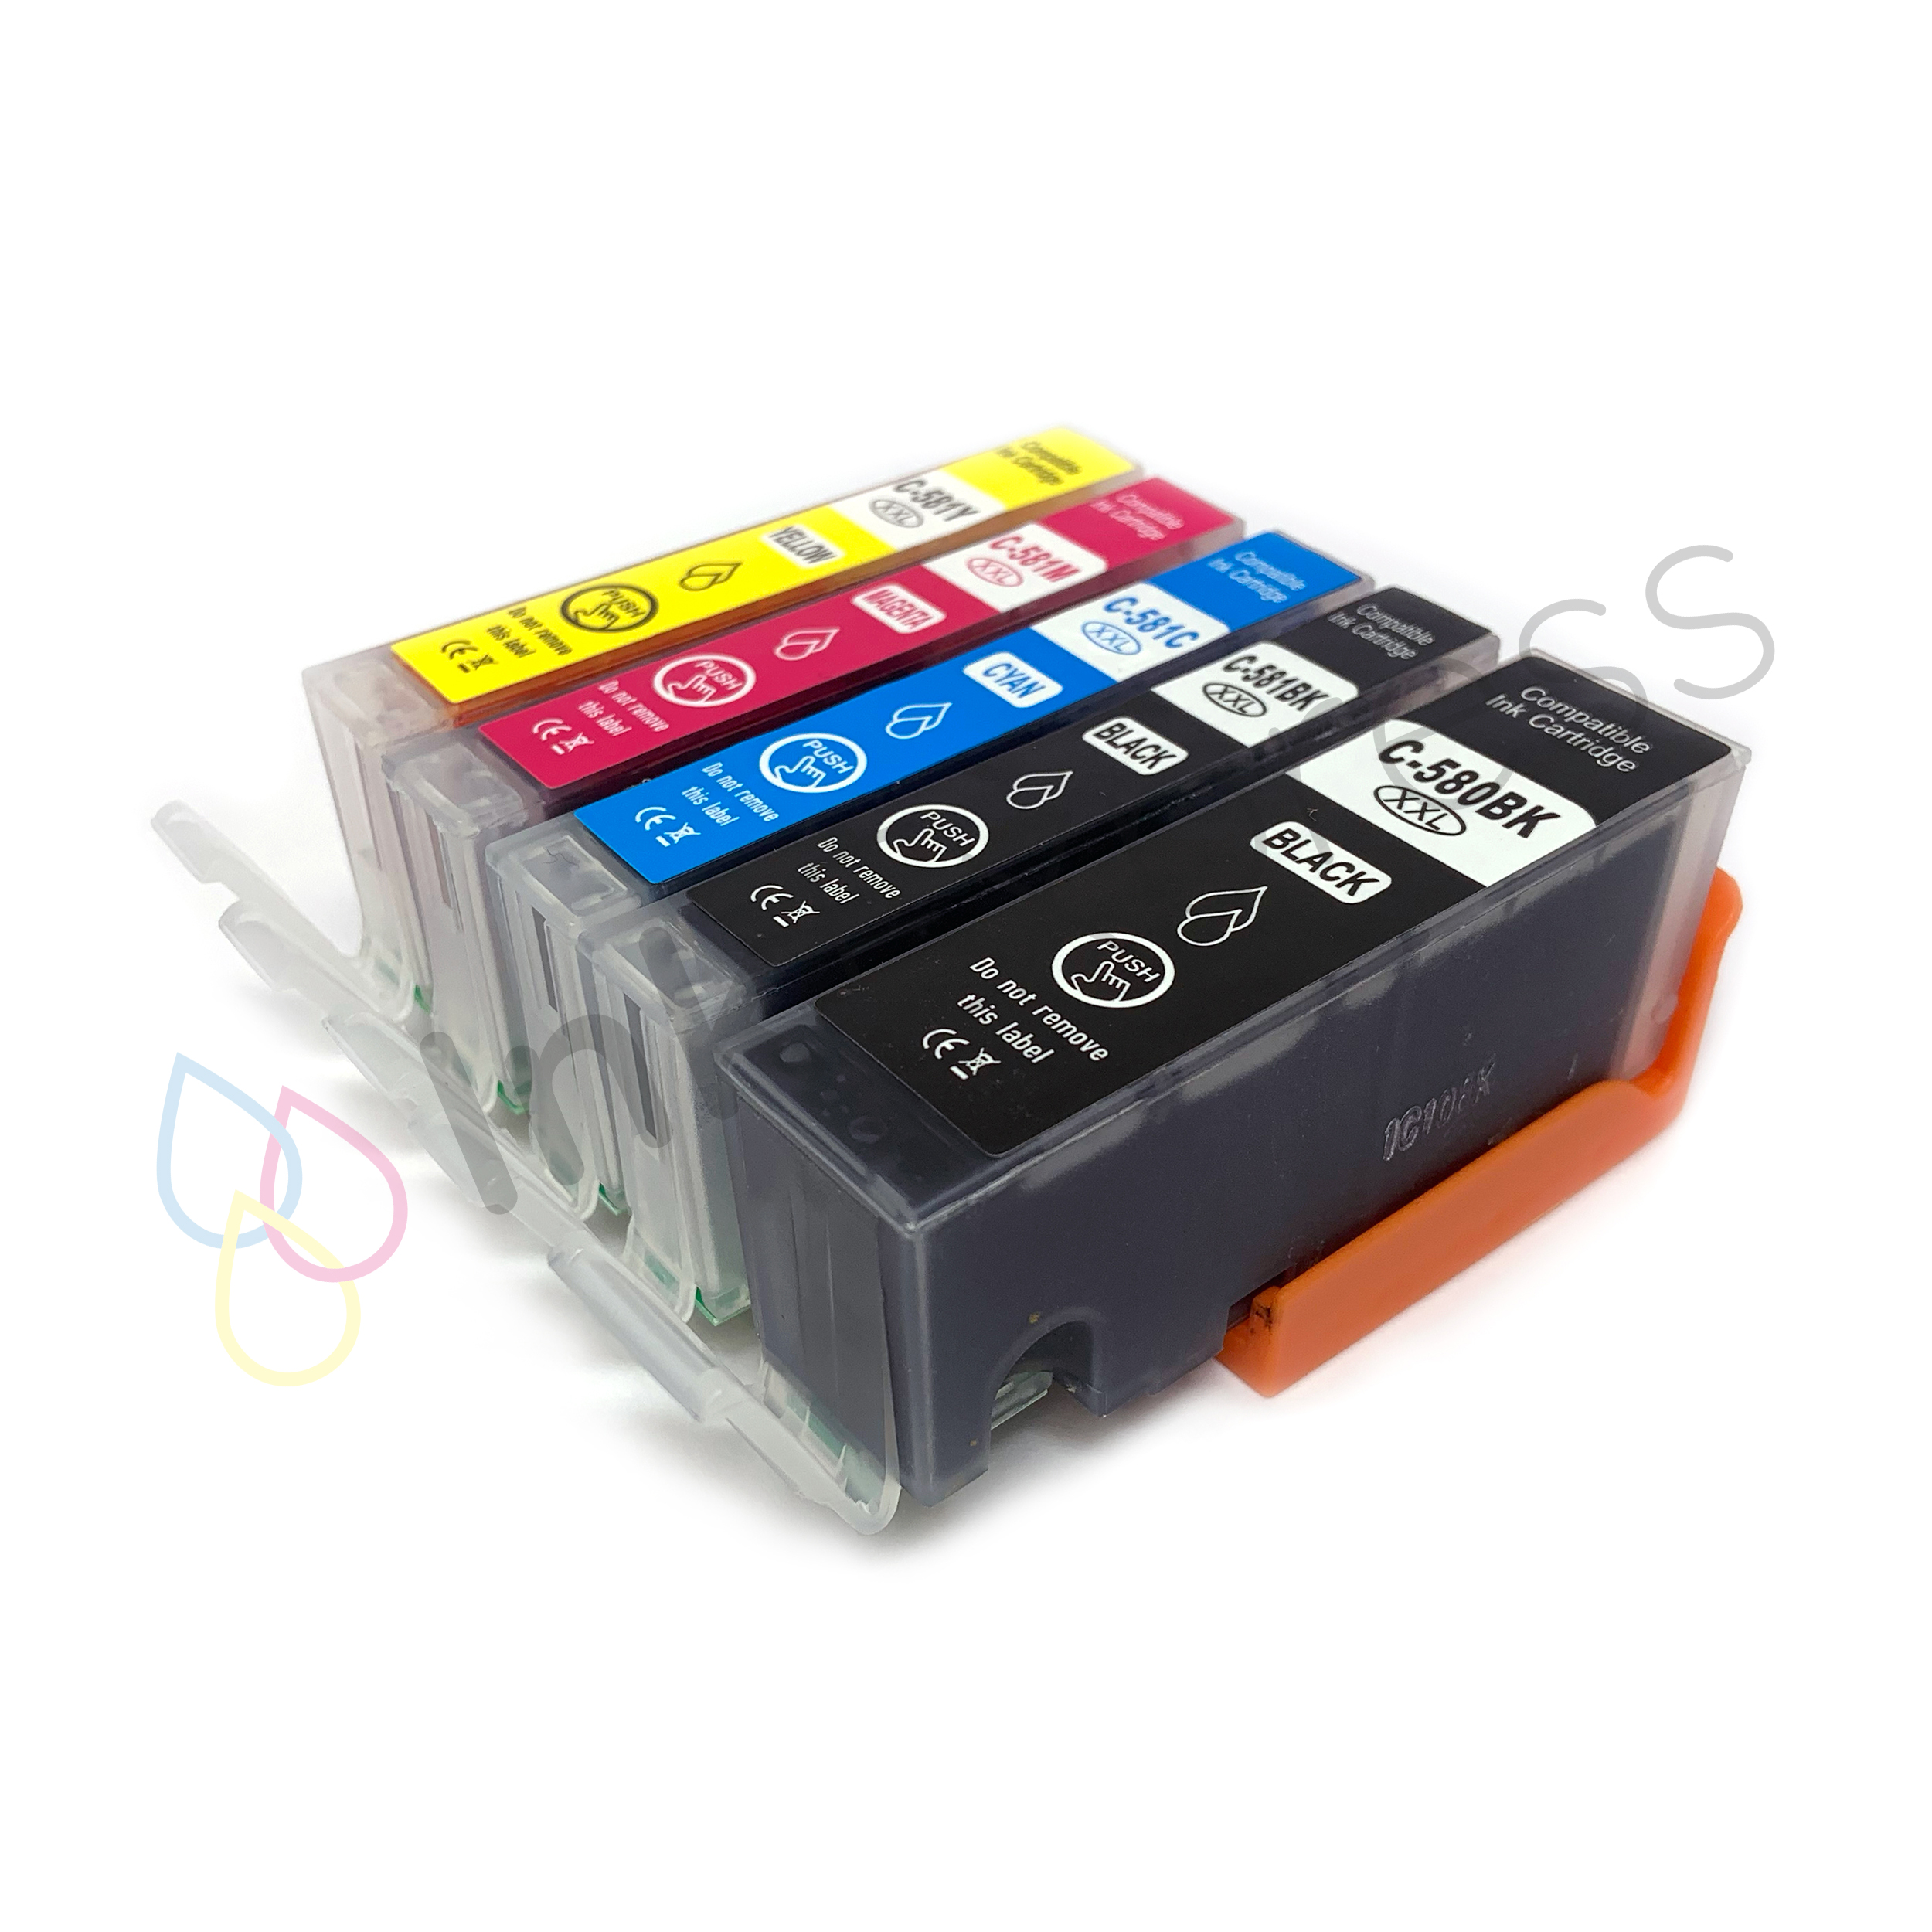  Compatible for PGI-580 CLI-581 580 581 Ink Cartridge